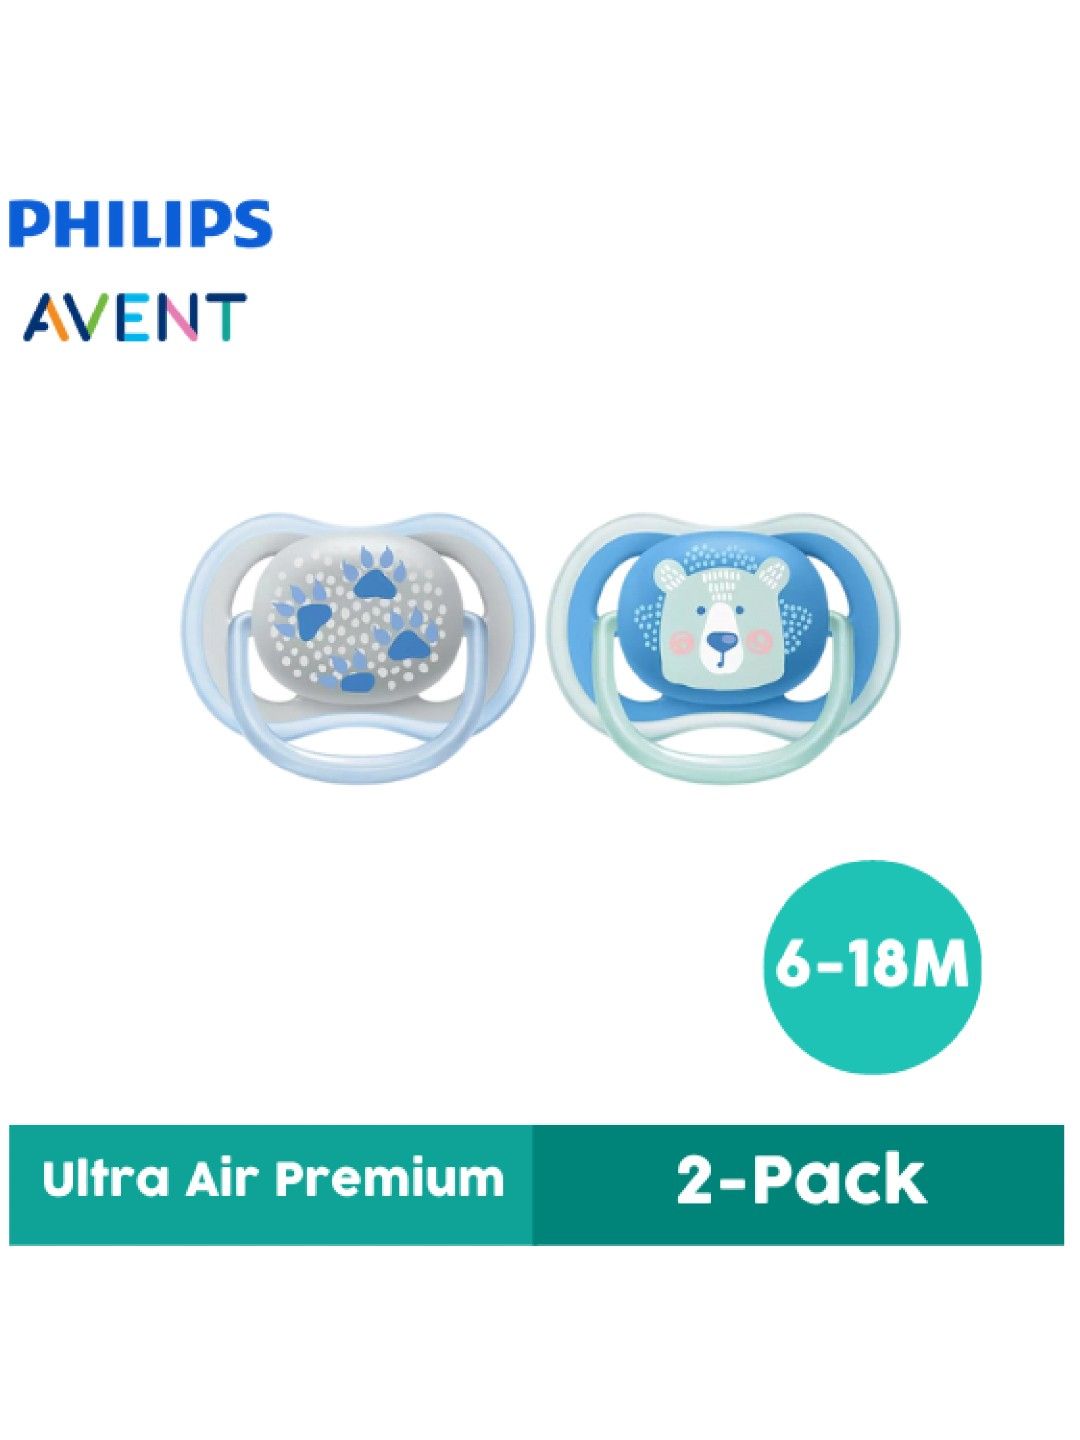 Avent Philips Avent 6-18M Ultra Air Premium Pacifier (2-pack)